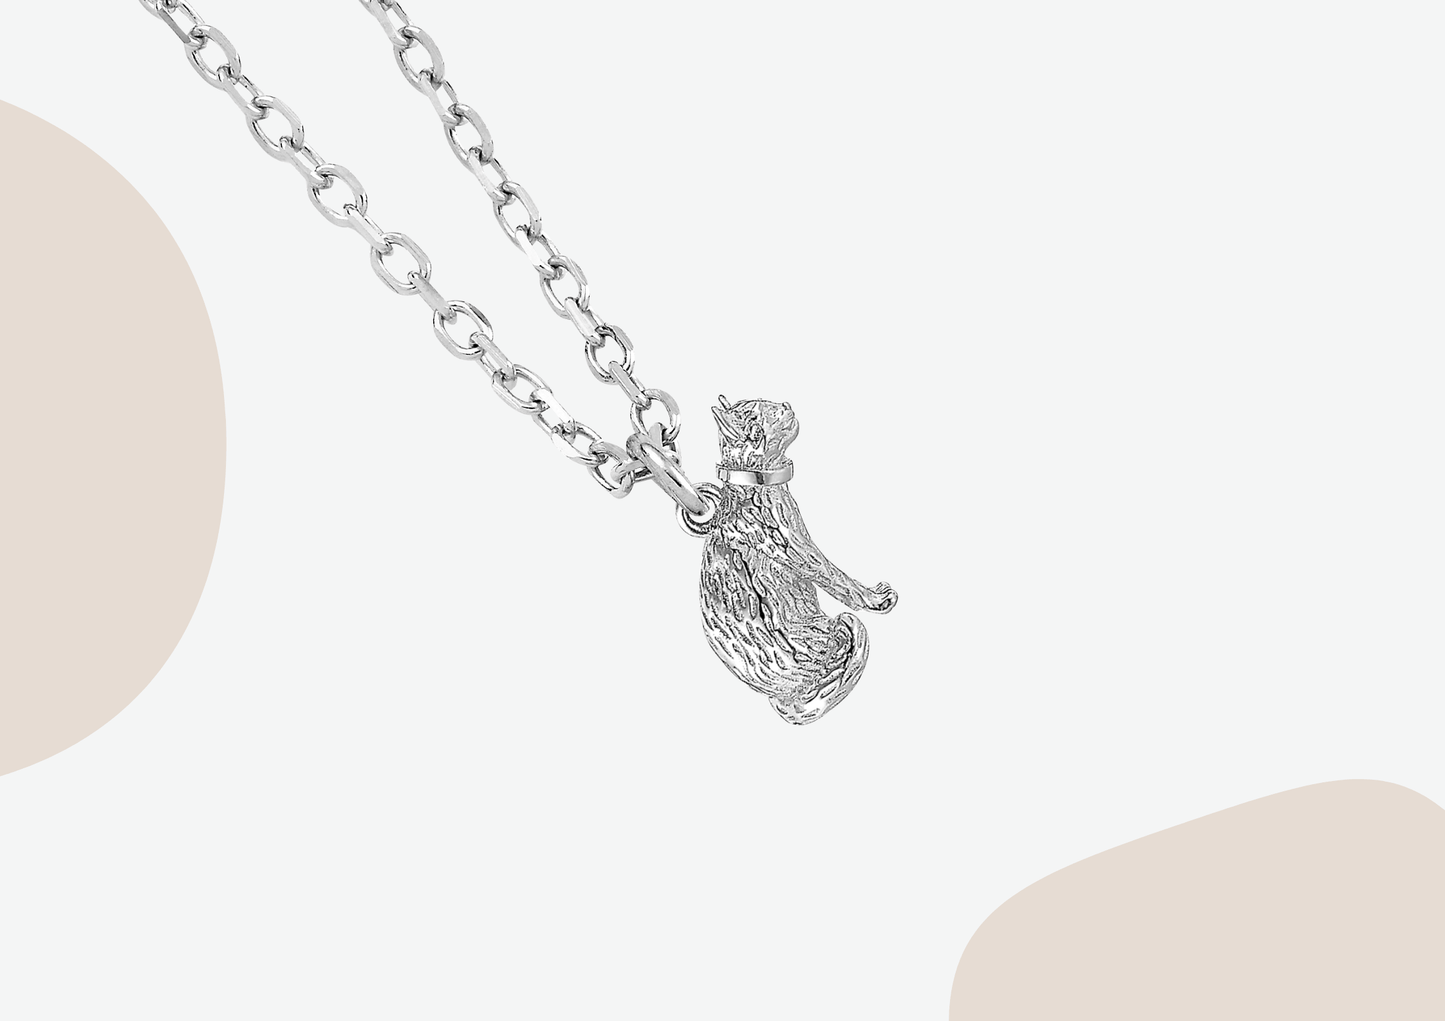 Long-Haired Cat Silver Necklace